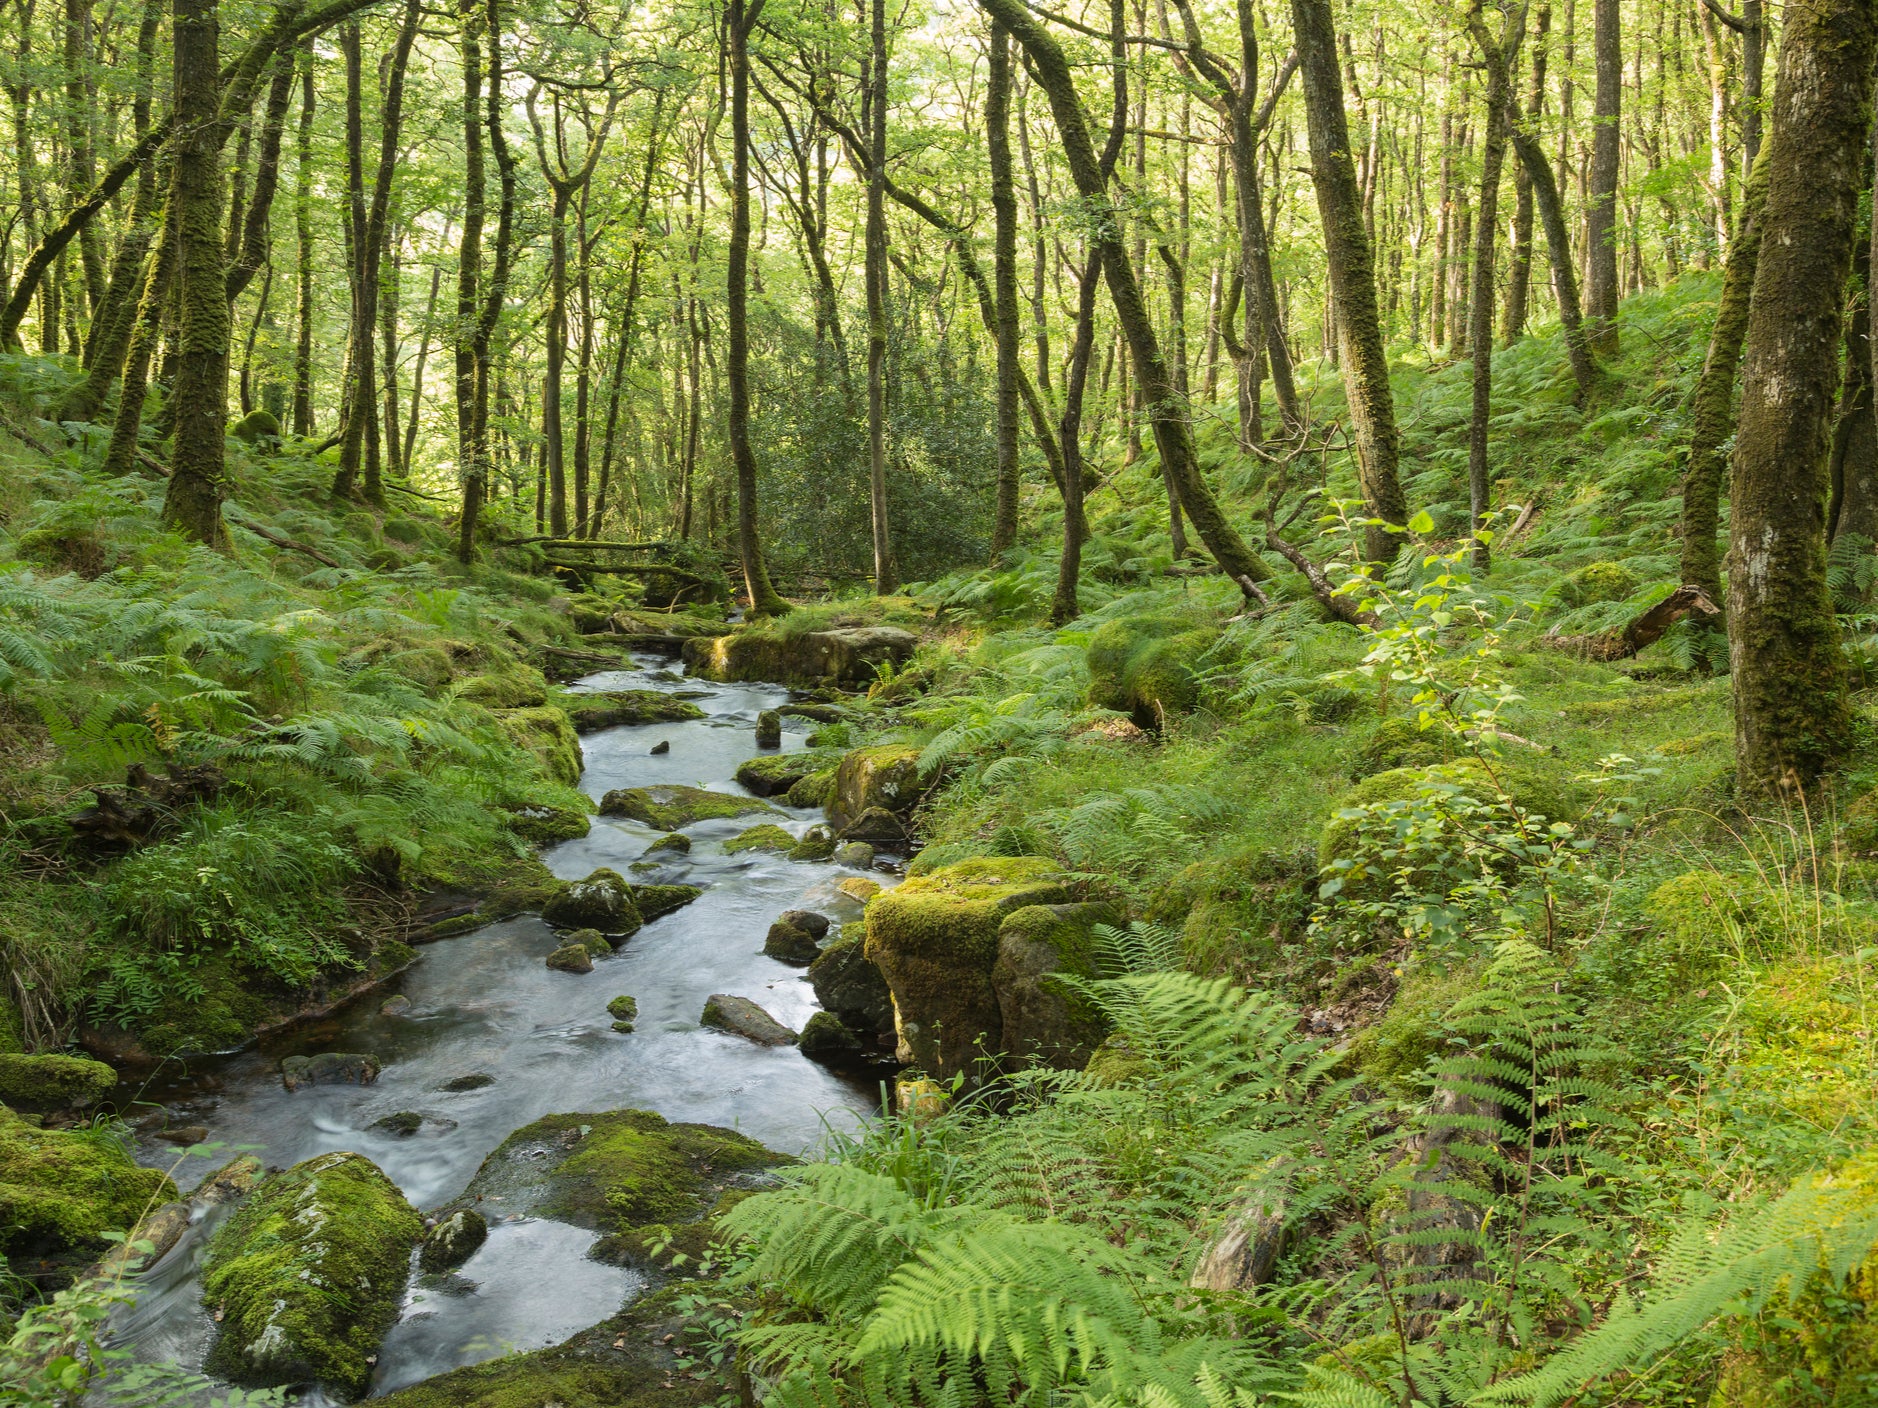 Forest in Dartmoor National Park, Devon. Just seven per cent of the UK’s forests are in good ecological shape, according to a recent report